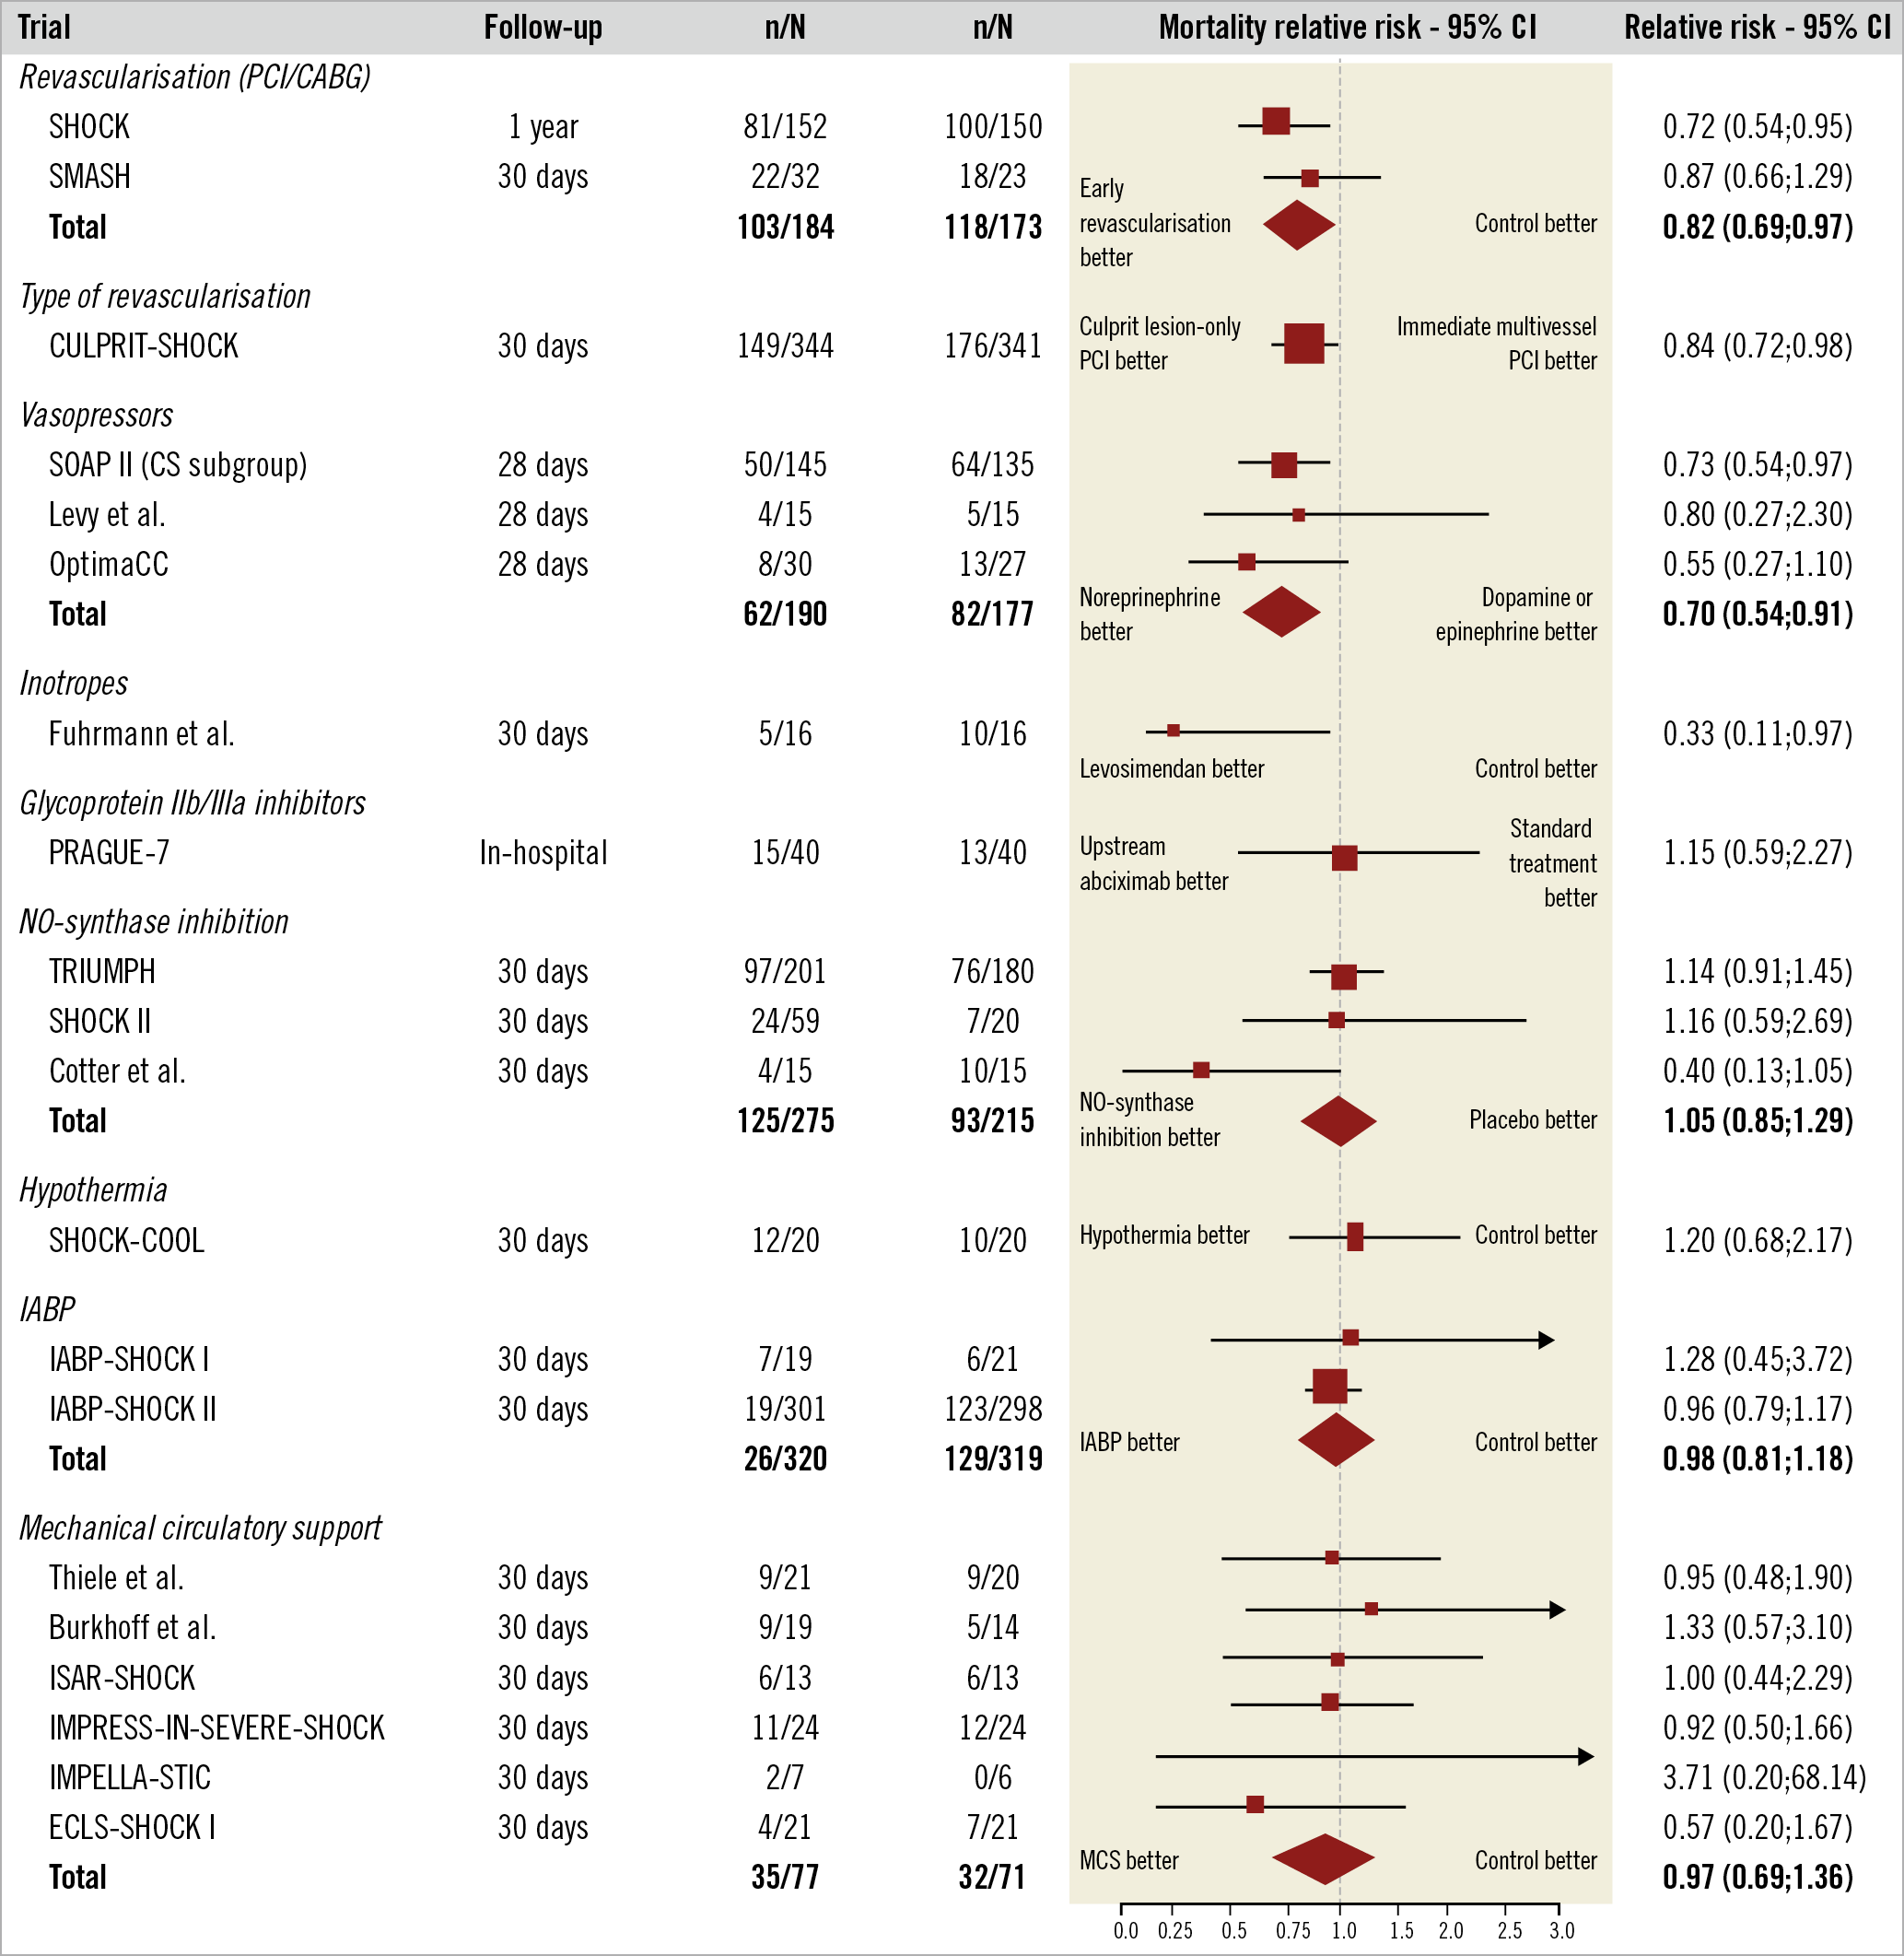 Figure 1. Current evidence from randomised clinical trials in cardiogenic shock in the PCI era. The relative risk and 95% confidence intervals (CI) are depicted for the various randomised interventions. The SOAP II trial was neutral with respect to mortality for the overall trial, thus the predefined cardiogenic shock - including various causes of cardiogenic shock - subgroup results need to be interpreted with caution.